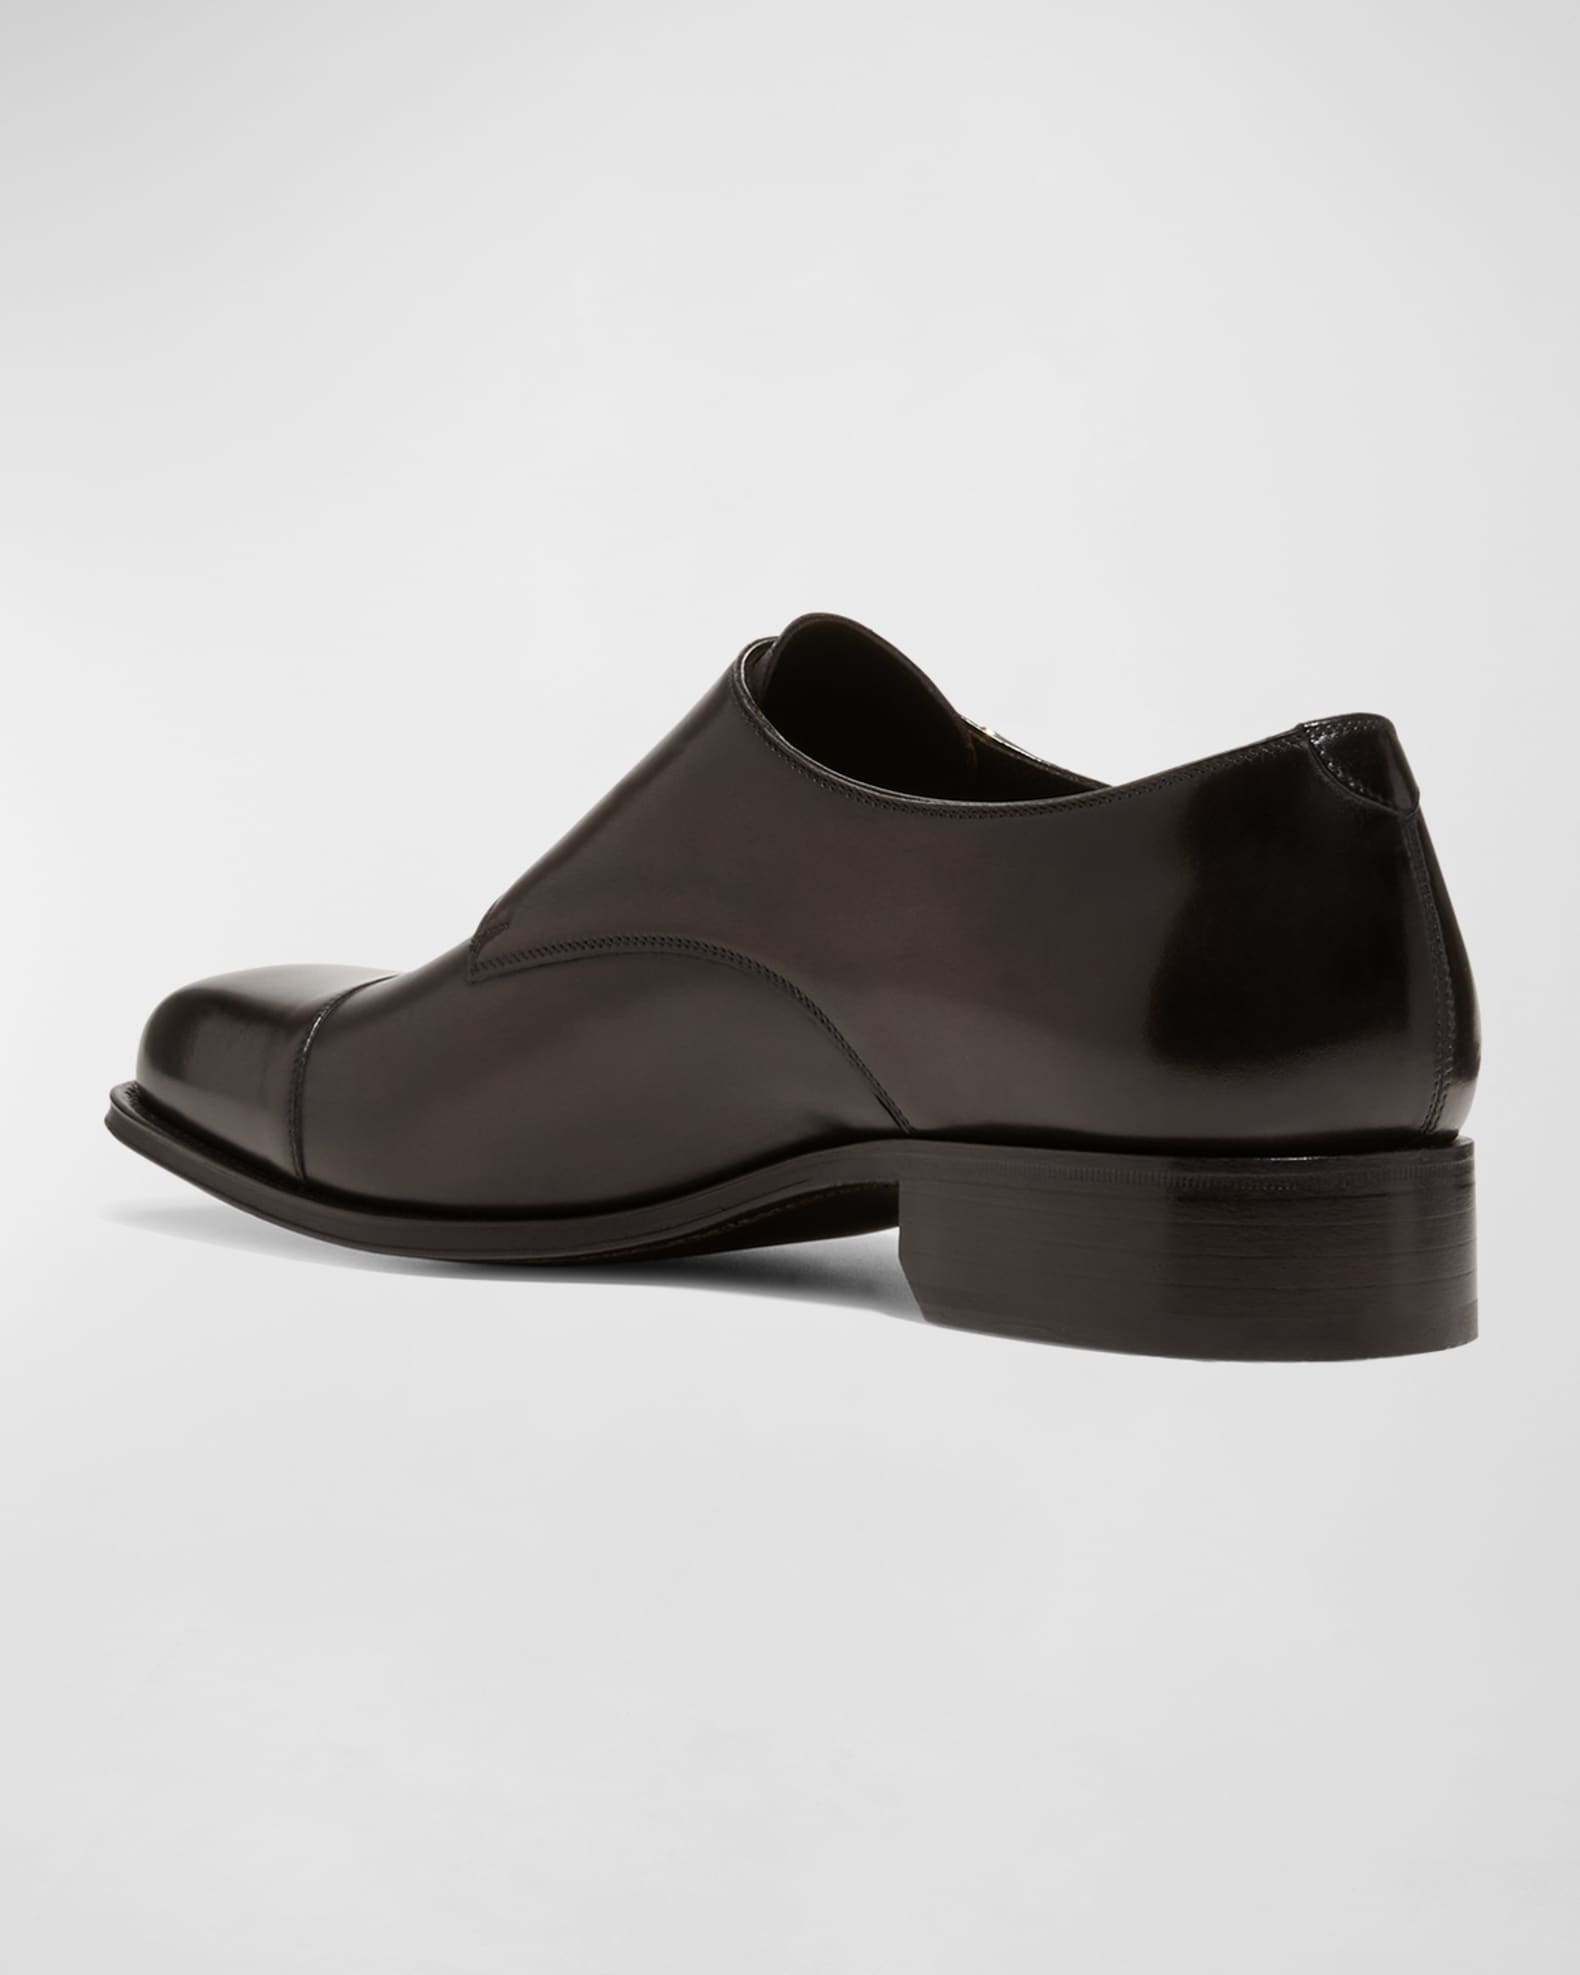 TOM FORD Men's Claydon Leather Double Monk Strap Loafers | Neiman Marcus